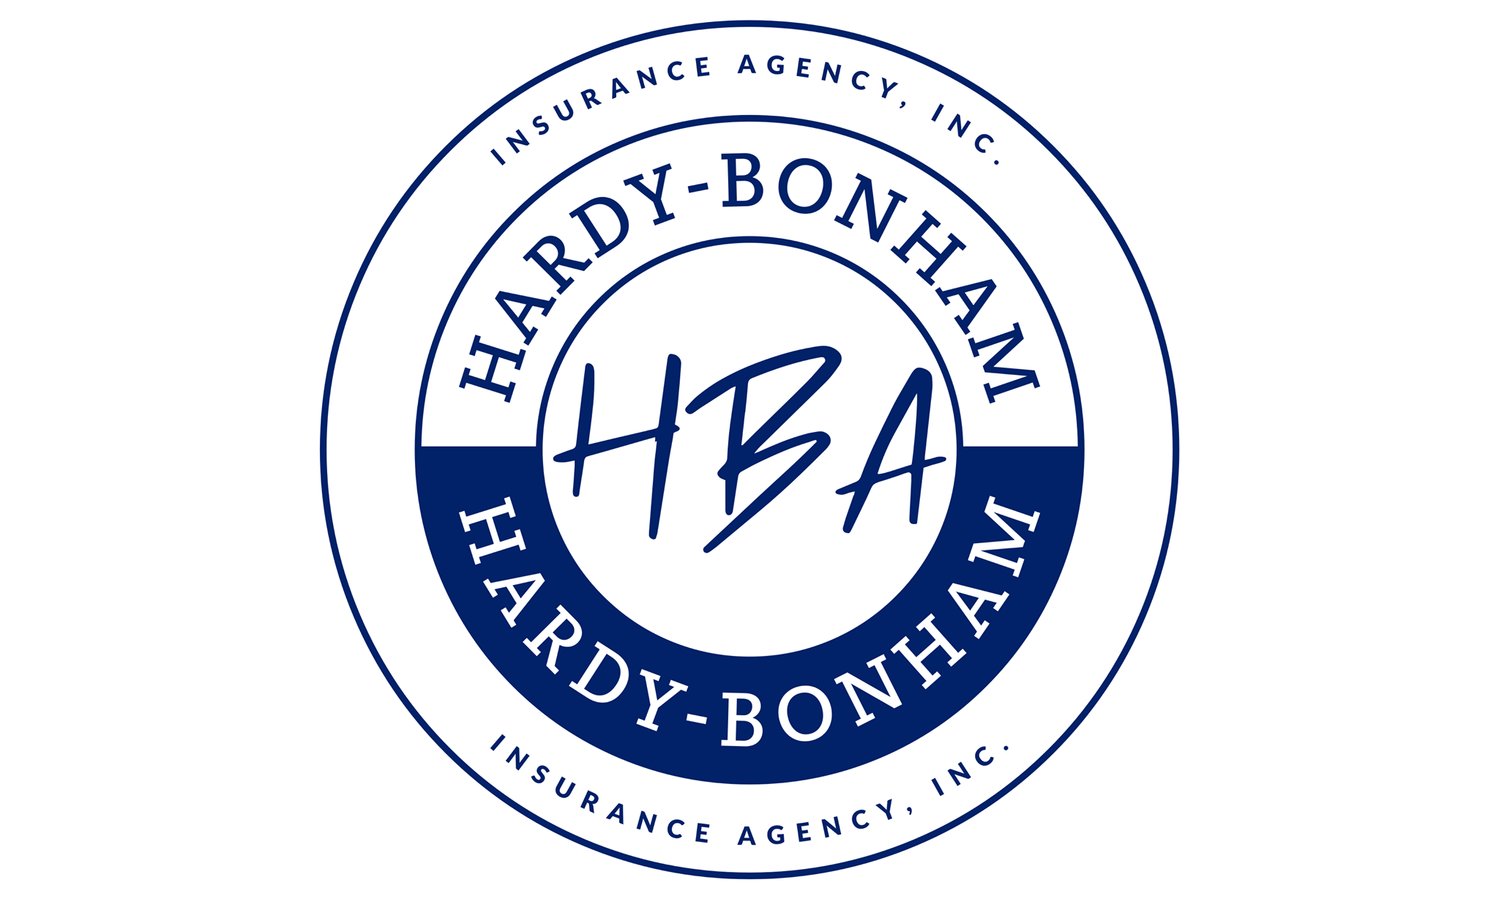 The new logo representing the acquisition of Bonham Insurance Agency by Joel Hardy and his Hardy Insurance Agency.